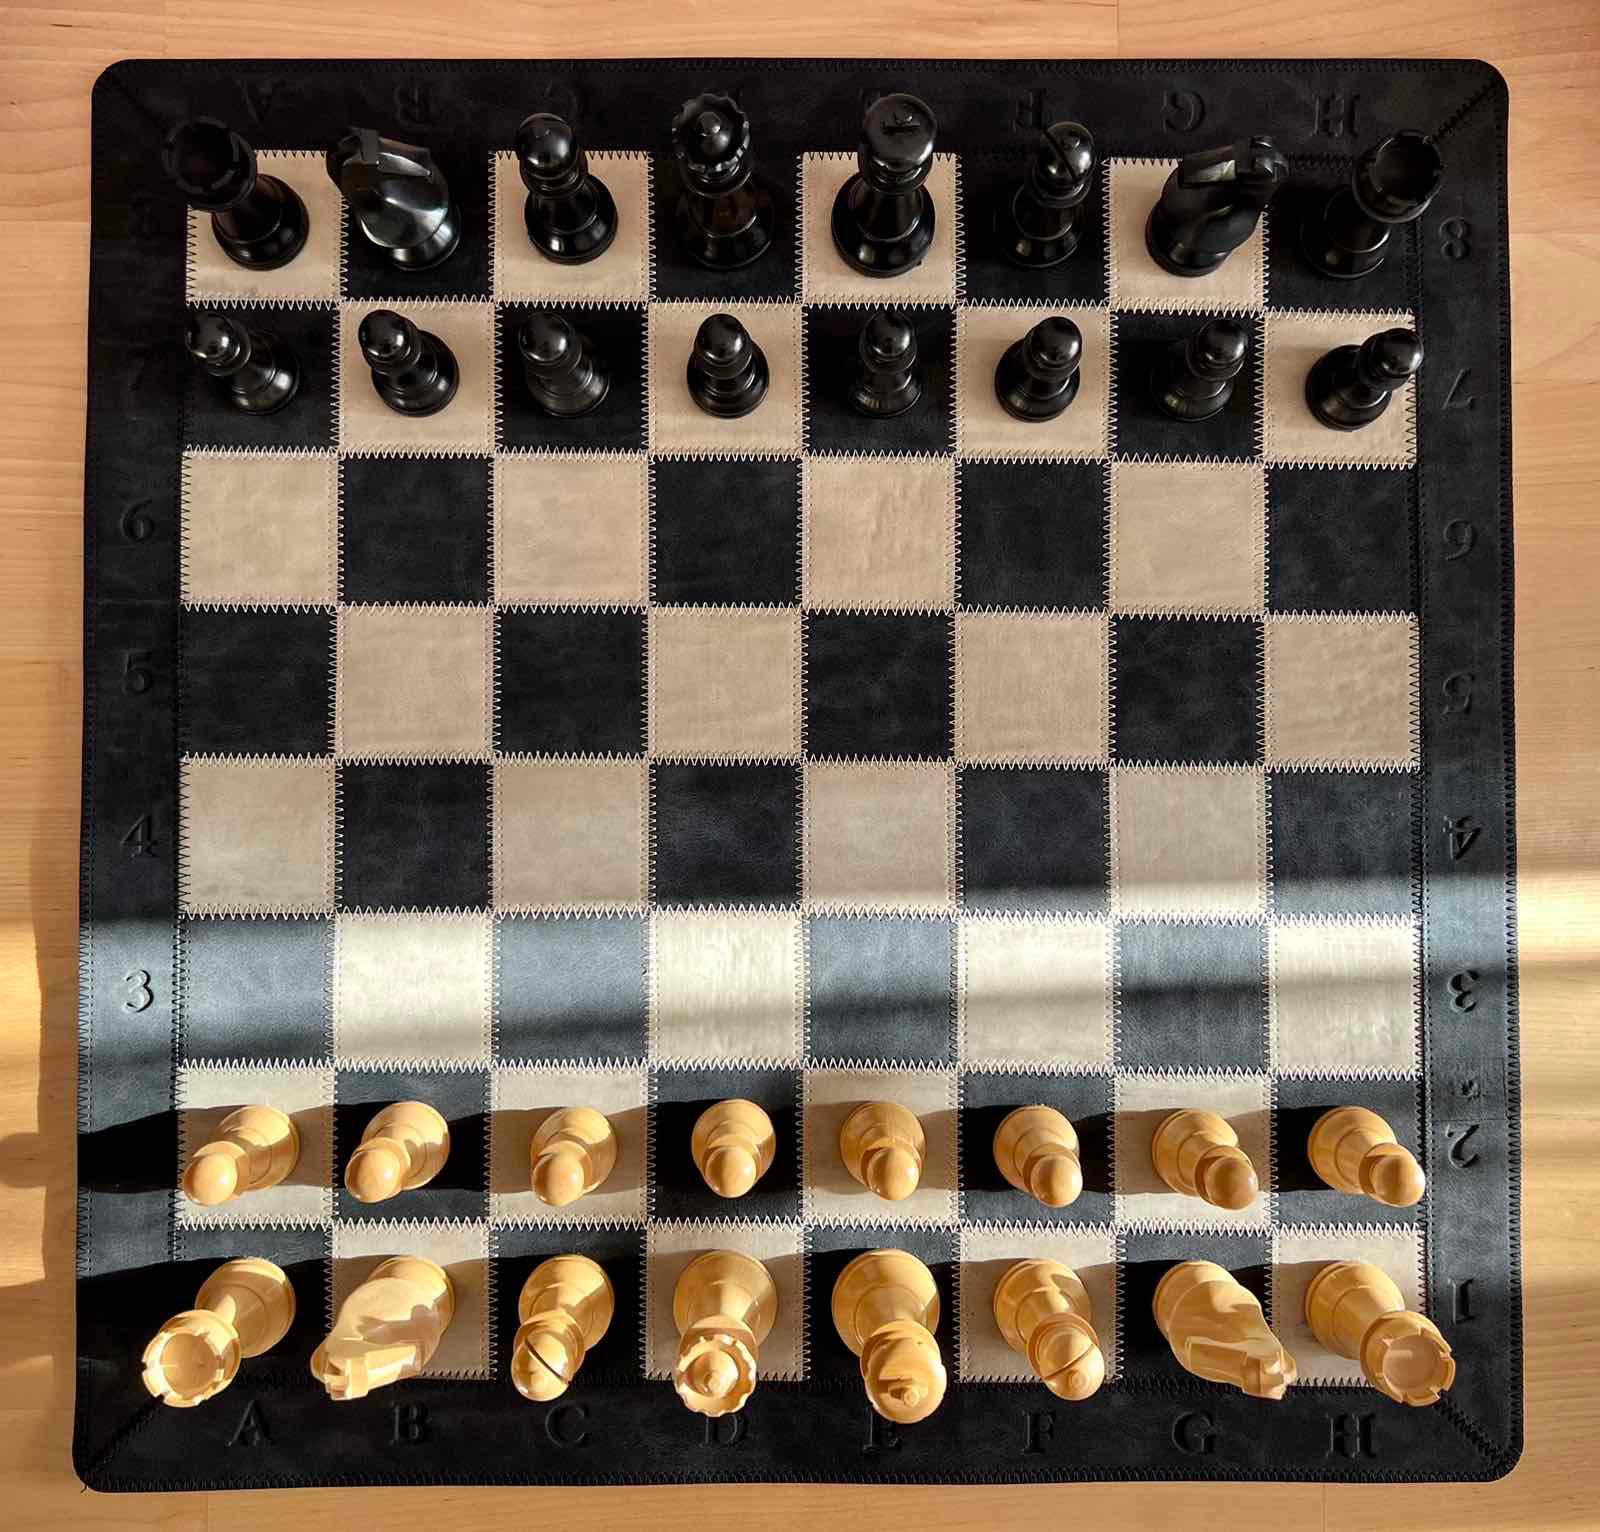 Chess Board Game